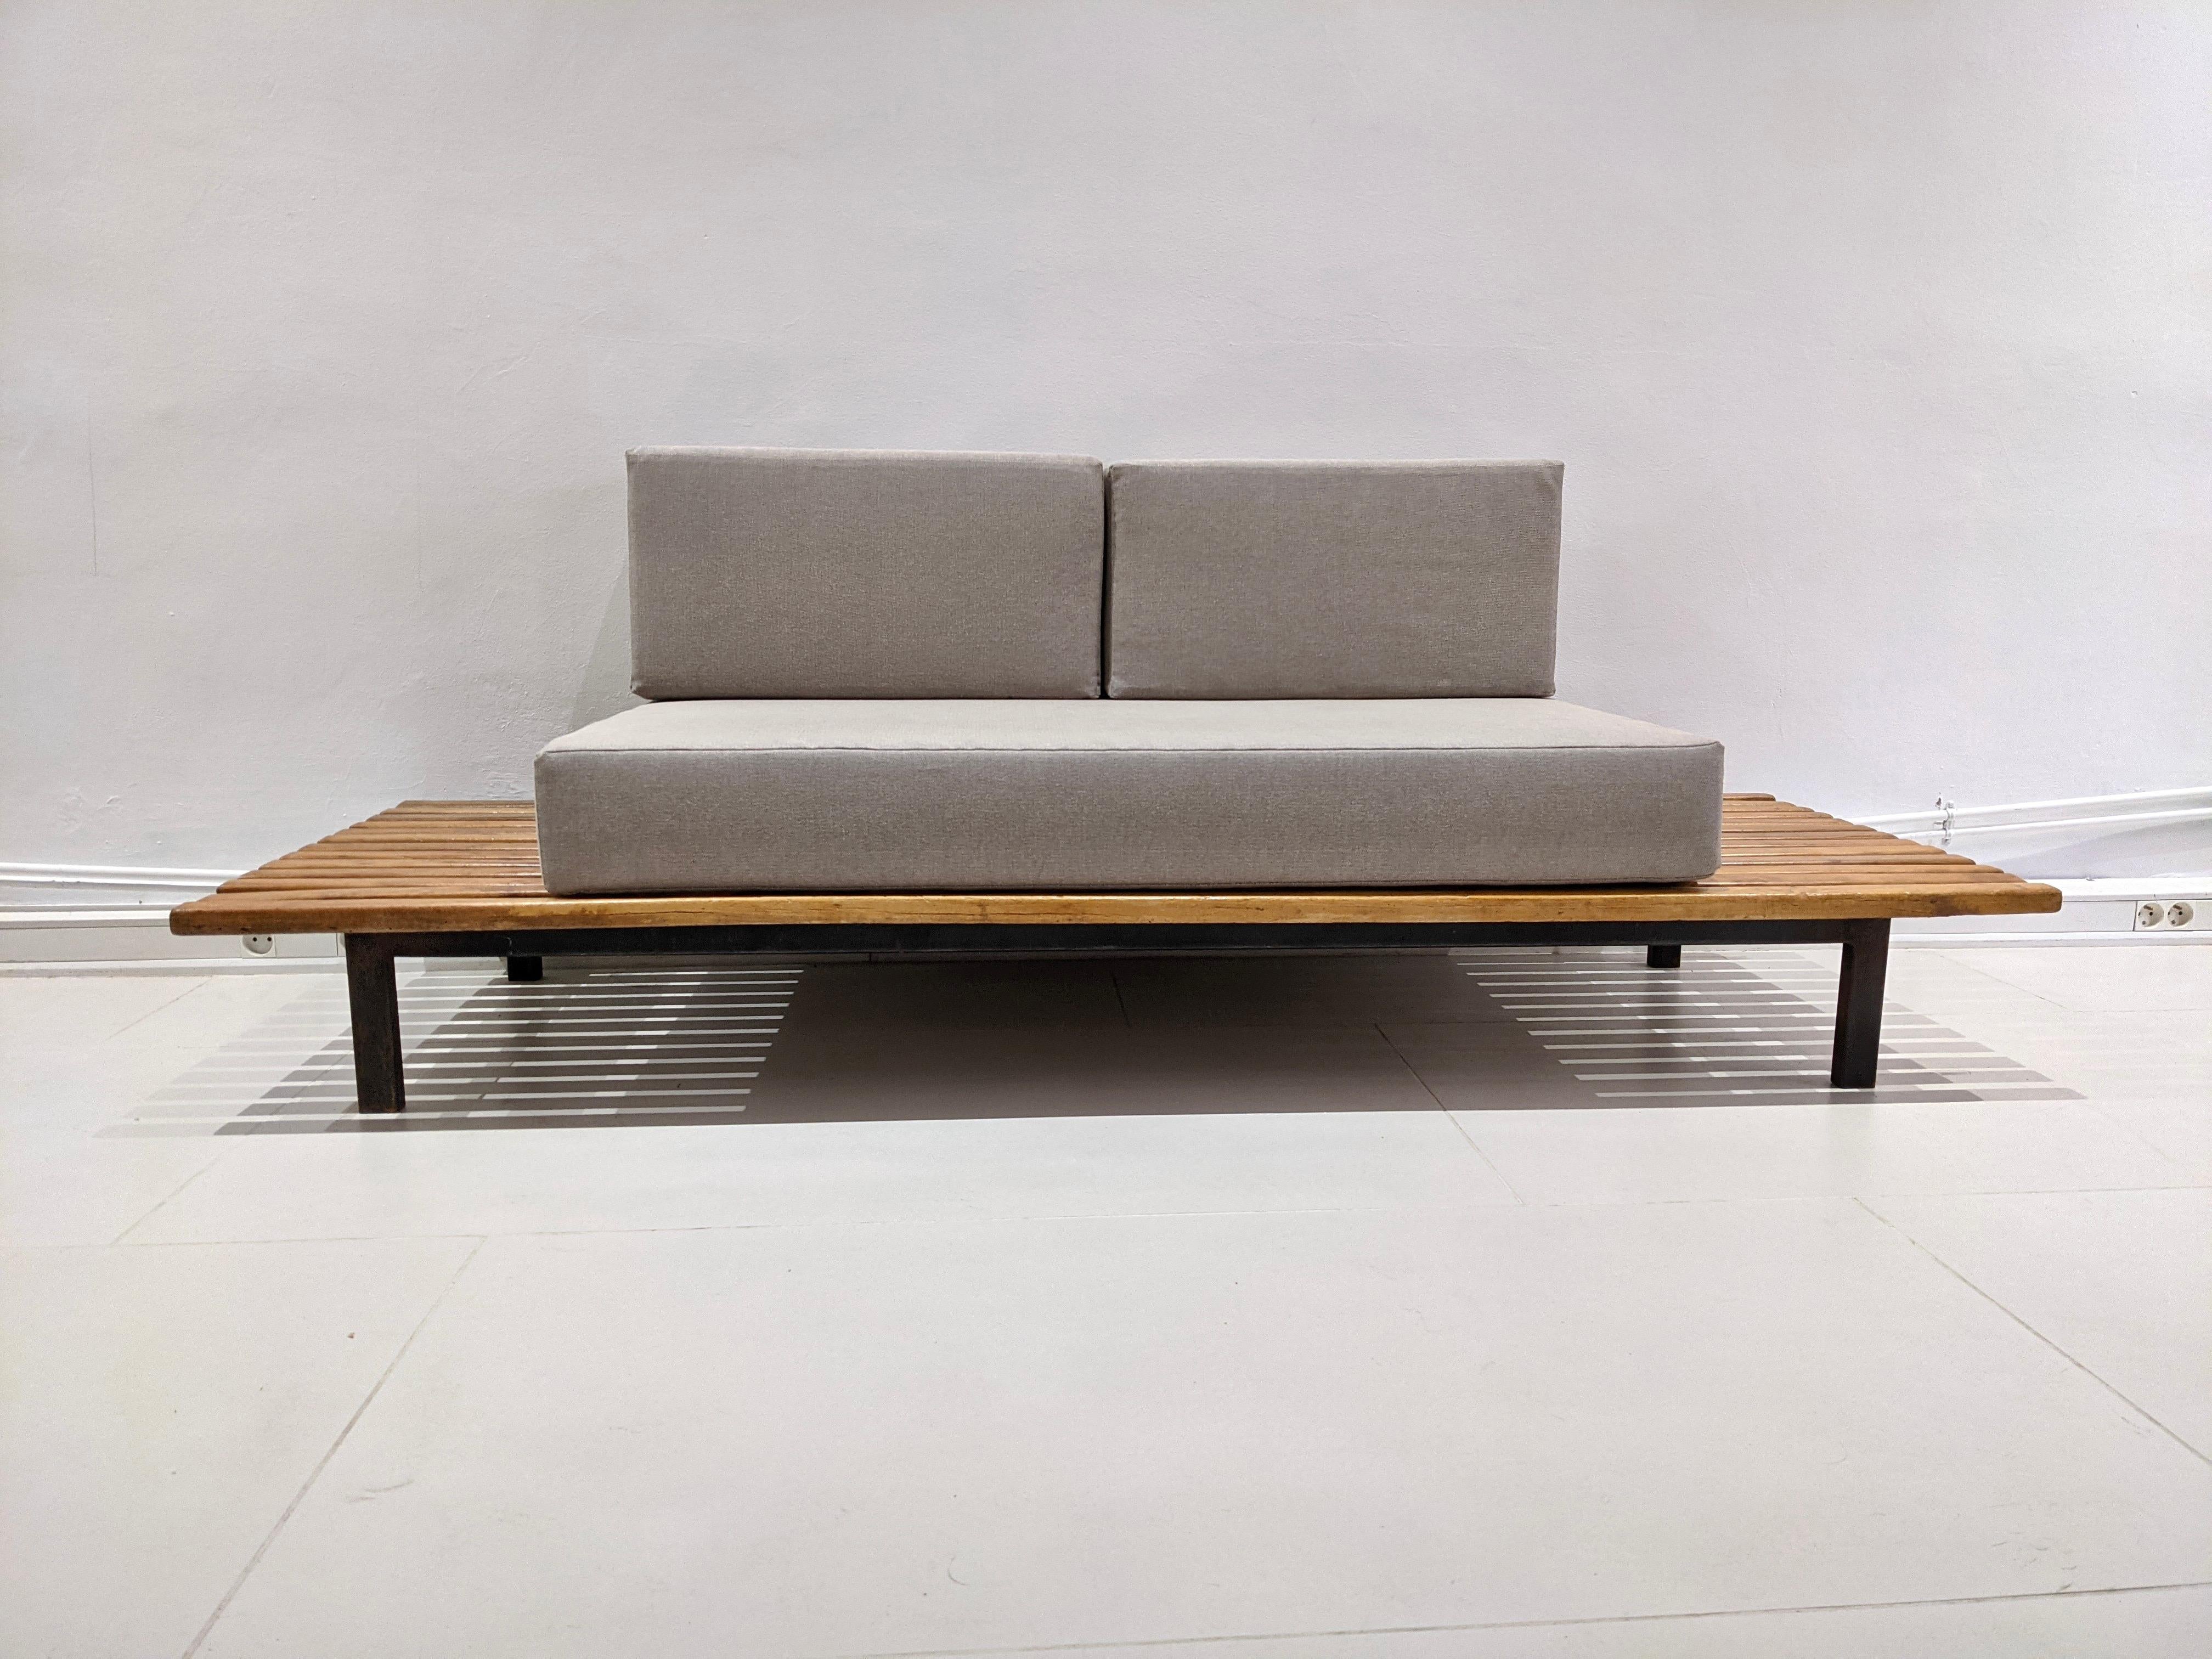 Cansado bench in mahogany tree by Charlotte Perriand, cushions in grey fabric. Year 1954. Edition Steph Simon. Very good condition. Provenance: Cansado mining town, Mauritania, Africa.